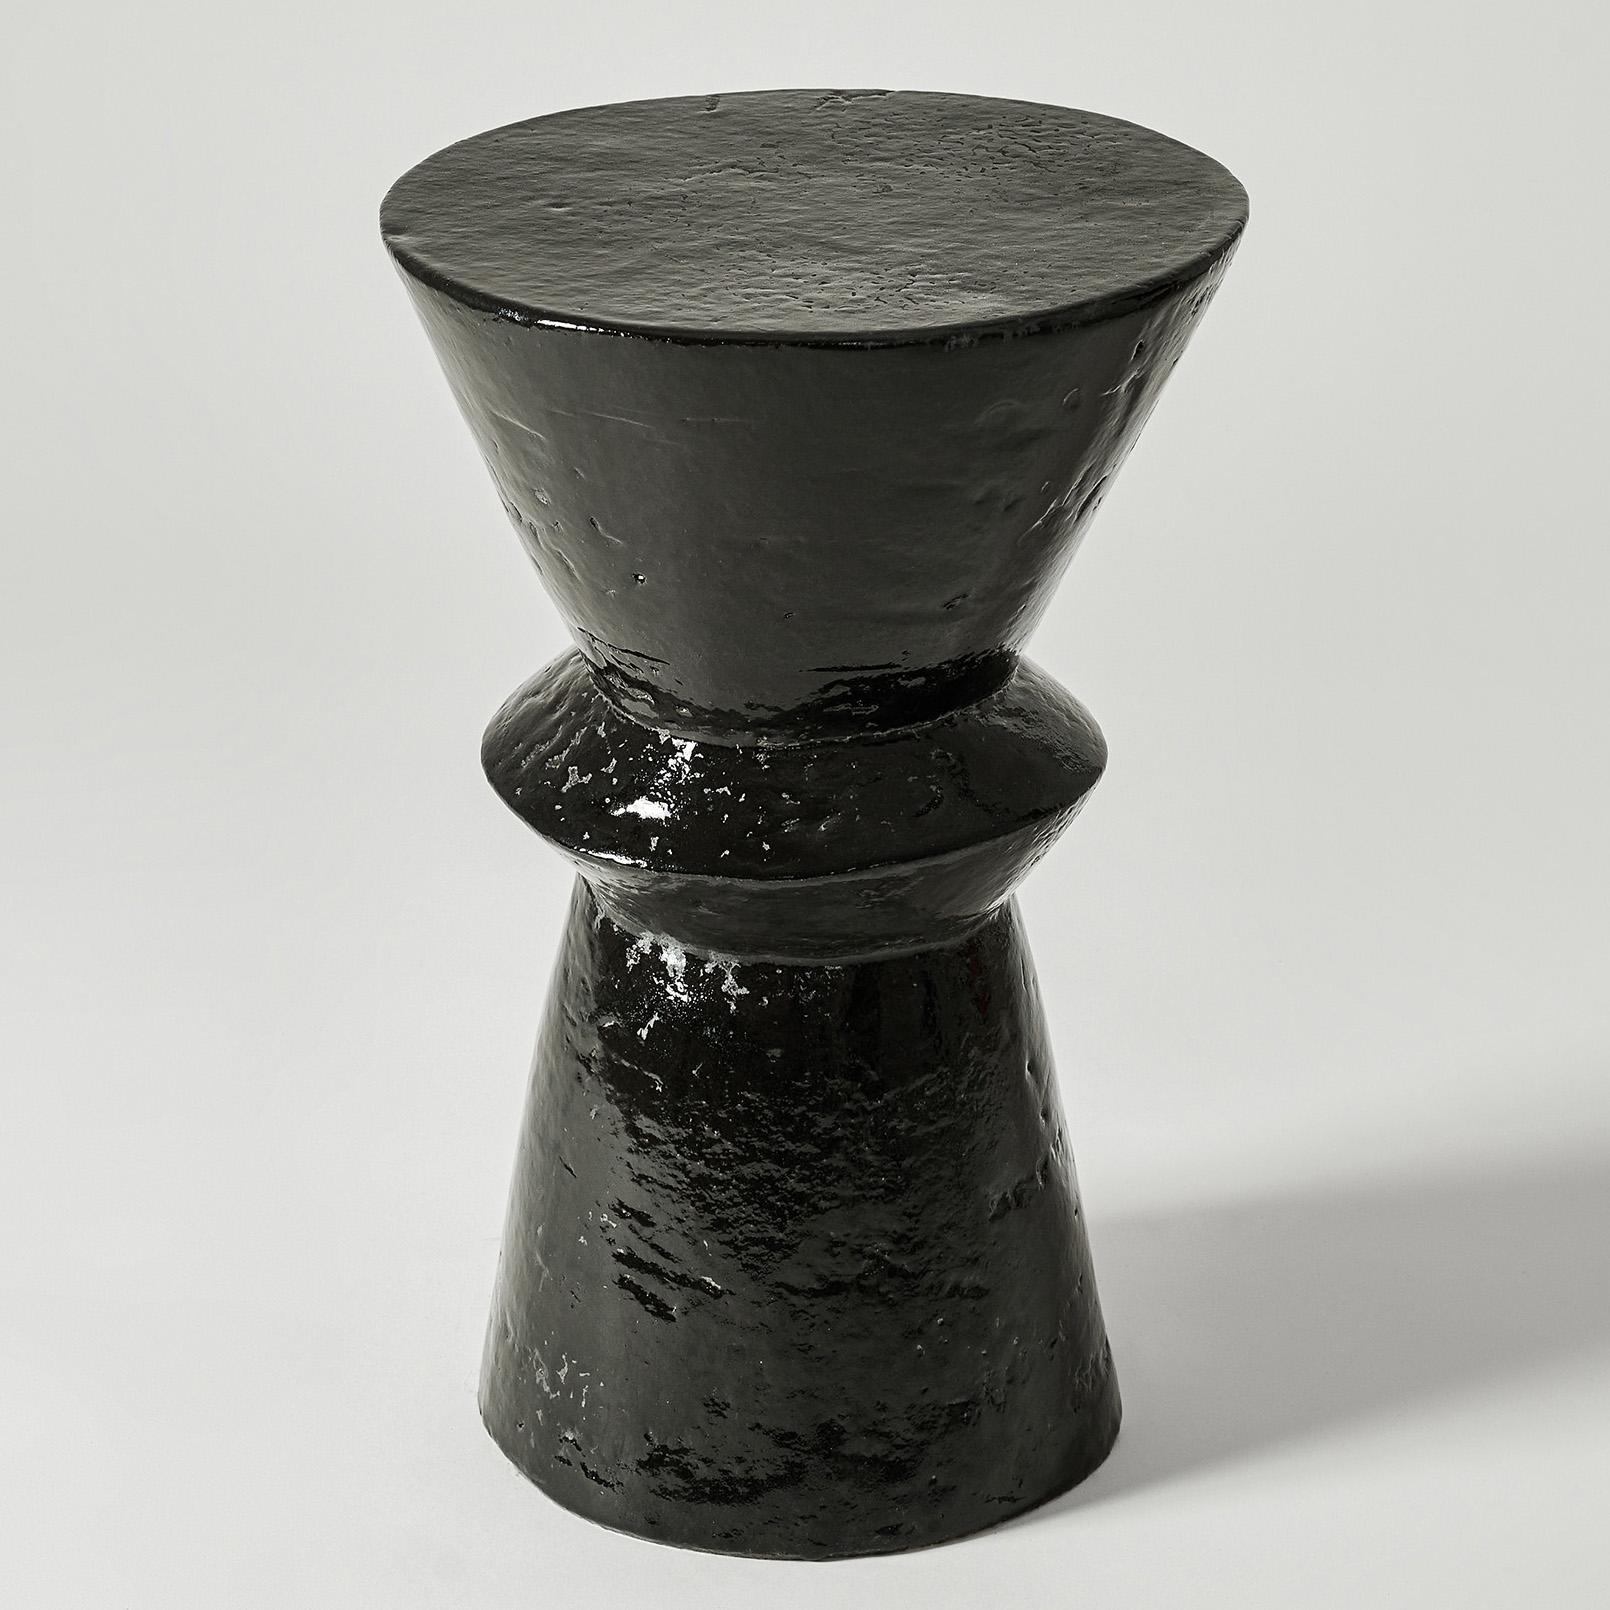 Black Pawn Side Table by Perler
Limited Edition
Dimensions: Ø 31 x H 48 cm.
Materials: Jesmonite.
Weight: 15 kg.

Black Pawn is a handmade ceramic table crafted by Polish artist Jakub Biewald. This versatile piece can be used as a coffee table, side